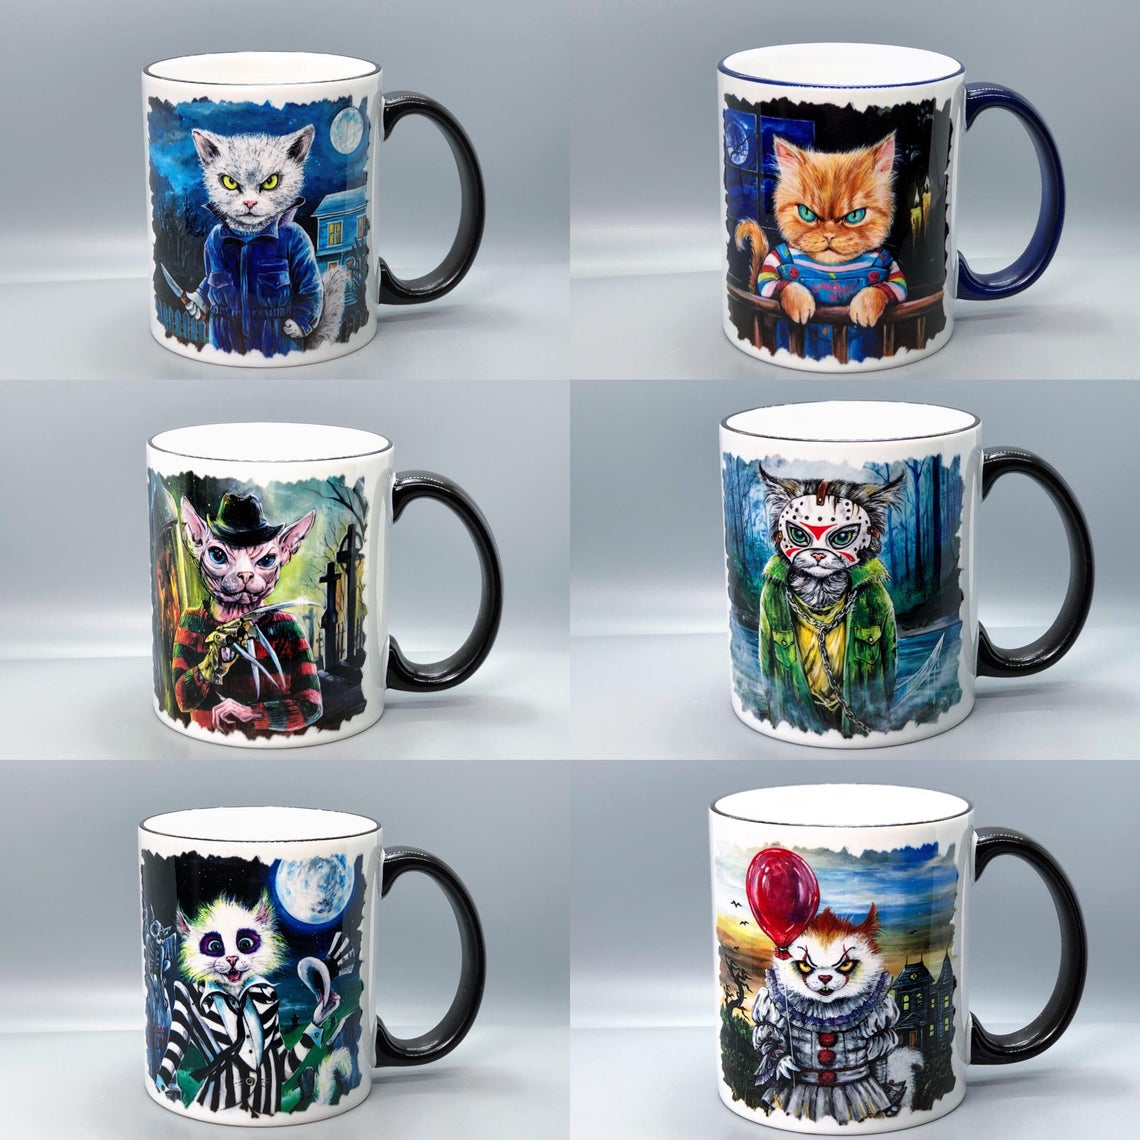 MUGS, Image of Your Choice! See Directions Below